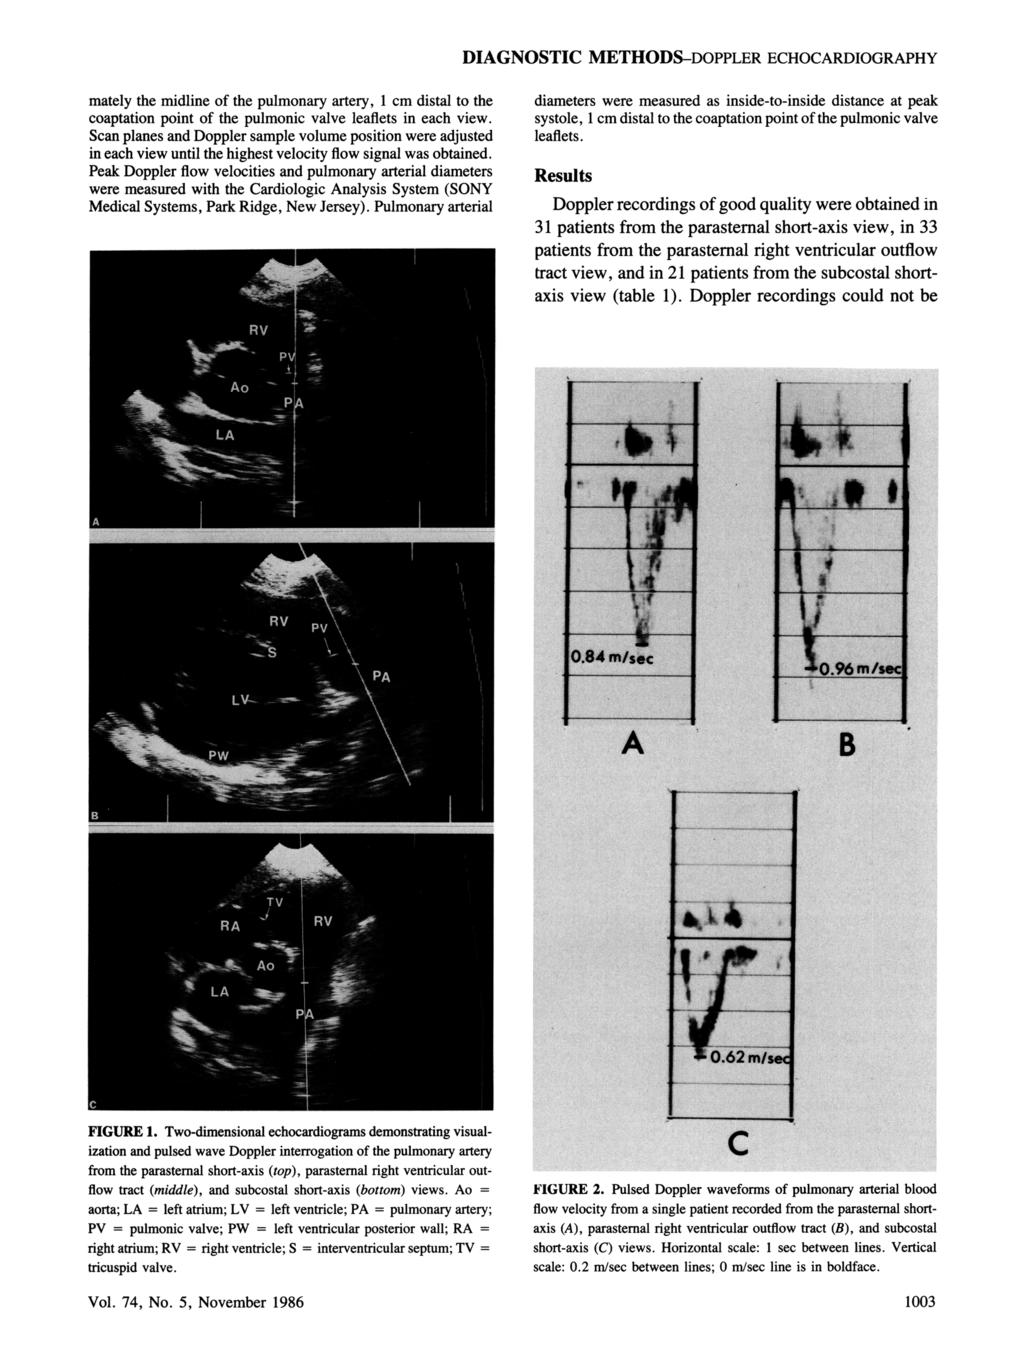 DIAGNOSTIC METHODS-DOPPLER ECHOCARDIOGRAPHY mately the midline of the pulmonary artery, 1 cm distal to the coaptation point of the pulmonic valve leaflets in each view.